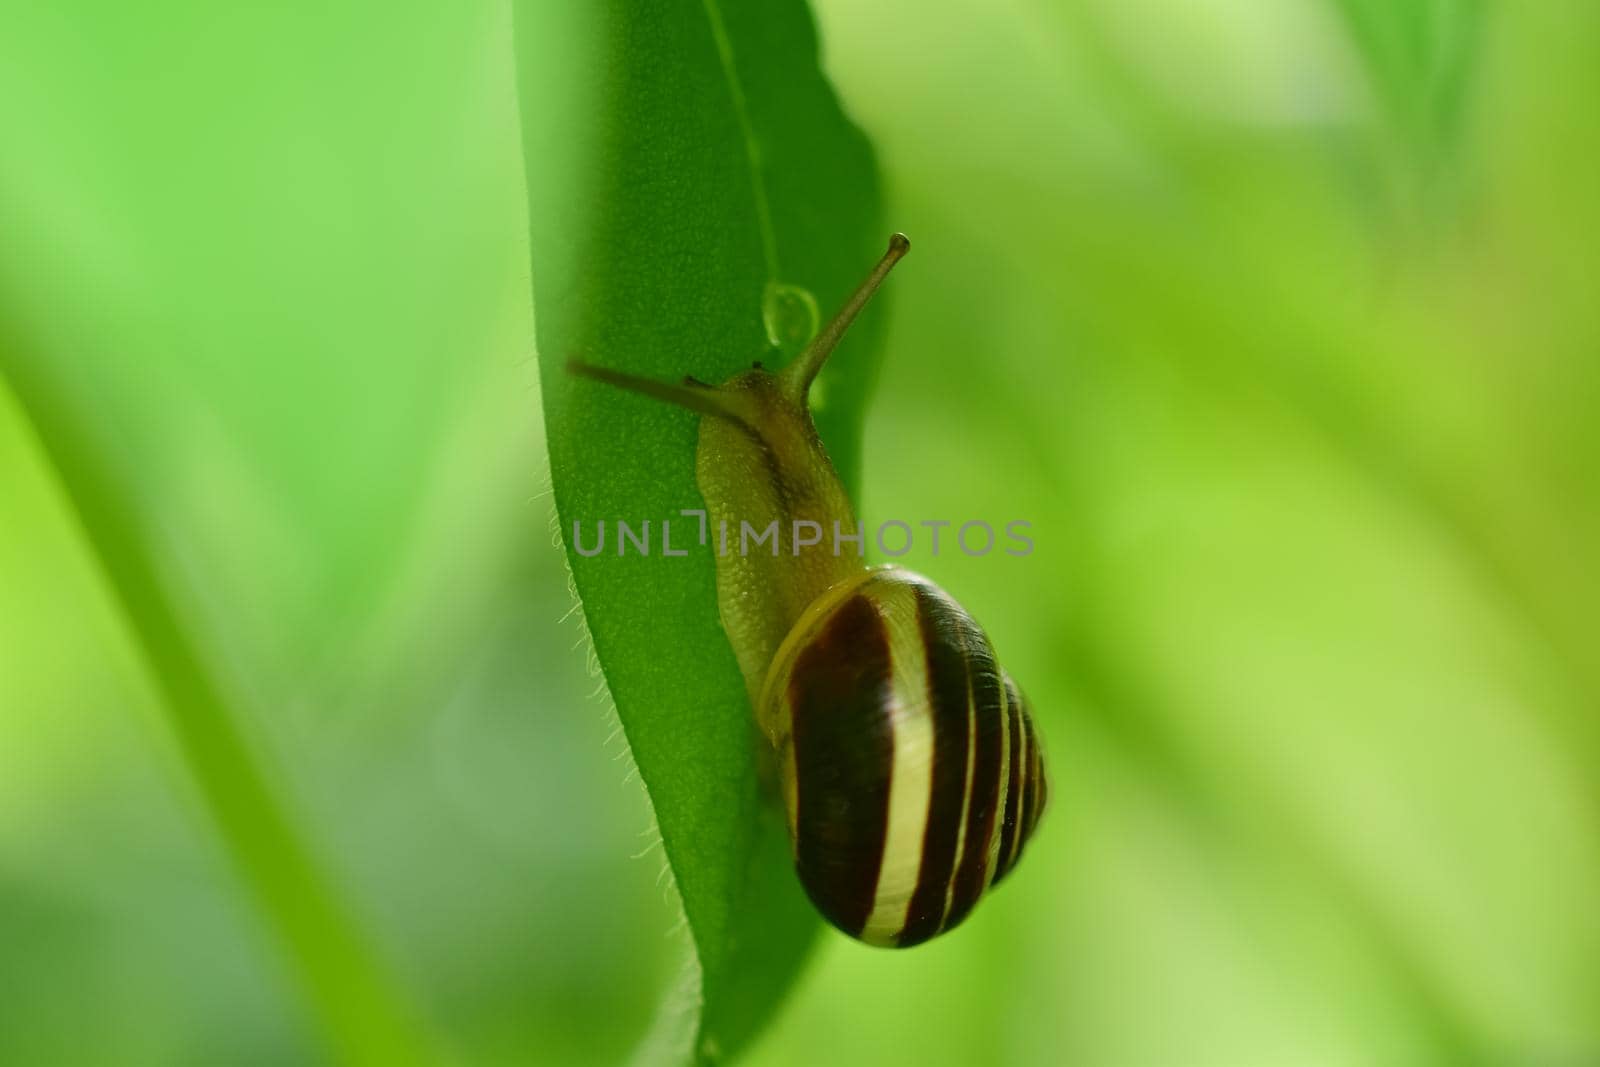 Close-up of a housing snail on a green leaf against agreen blurred background